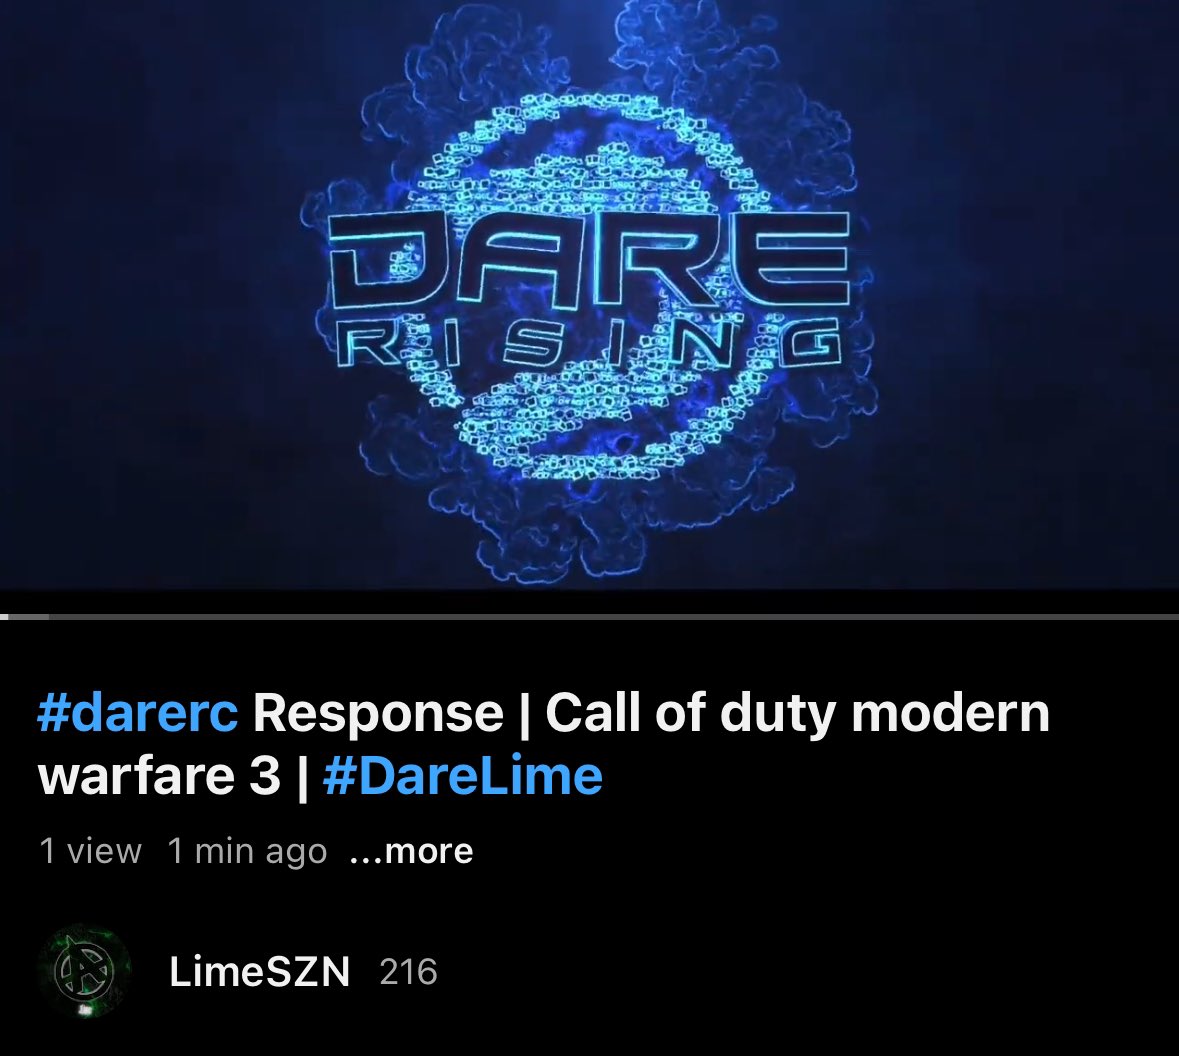 #DareRC Response is up good luck to everyone and thank you for allowing me to participate in this Had a lot of fun 
@DareRising #DareLime 

youtu.be/vTSQ7230oos?si…